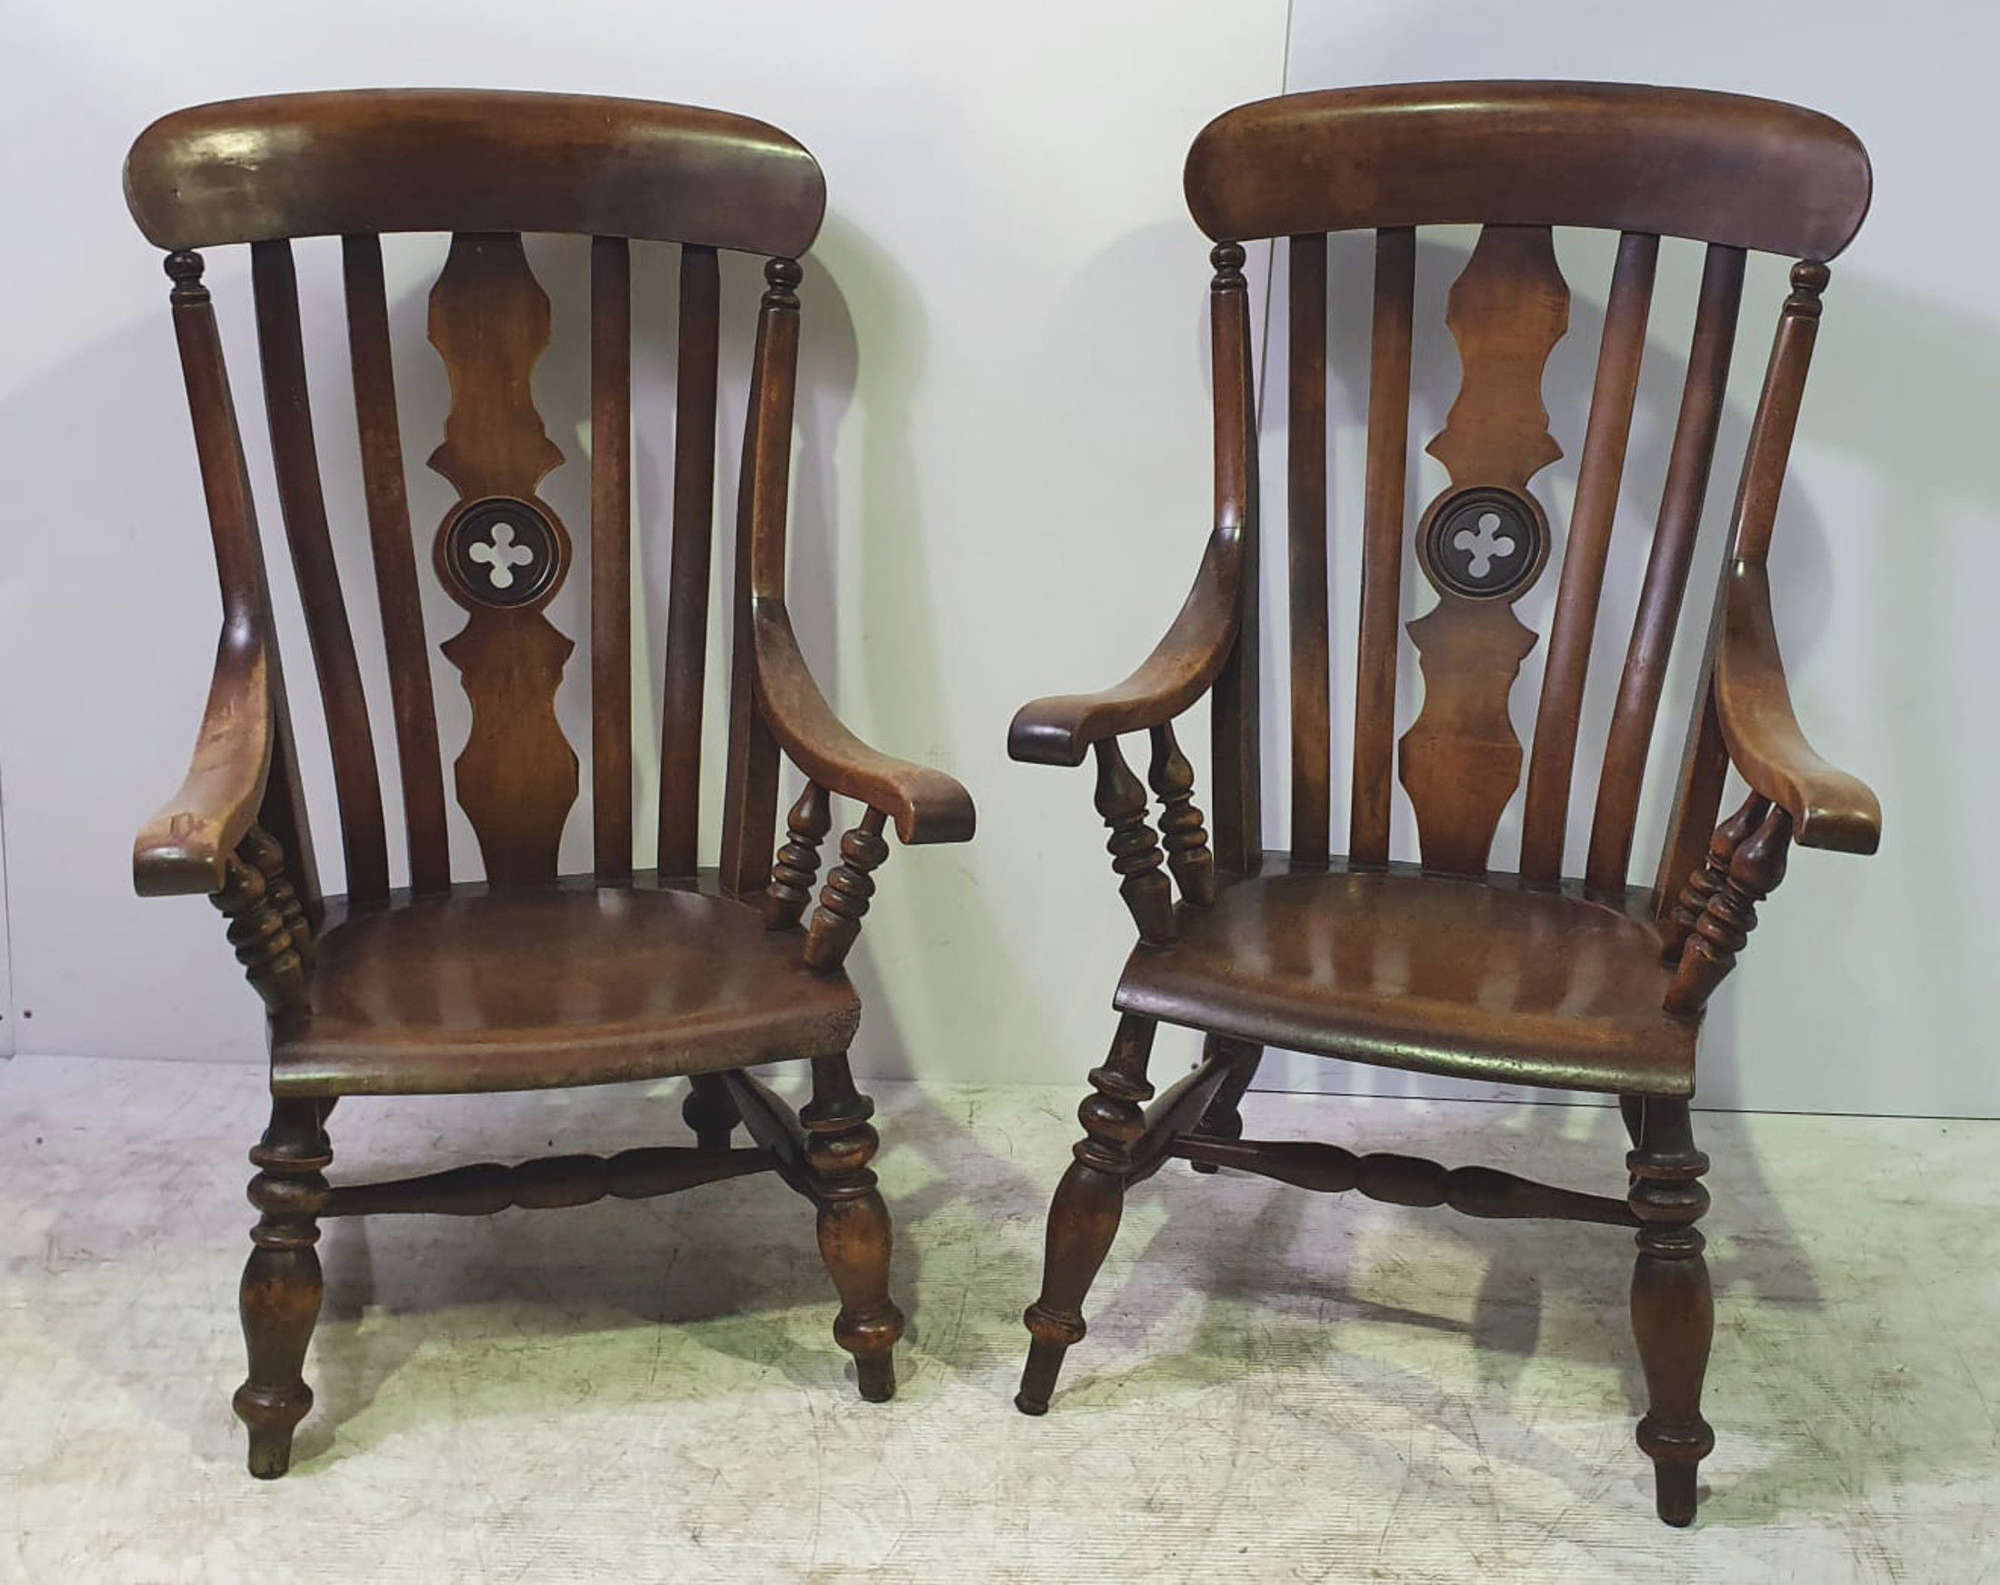 Rare Near Pair of 19th Century Ash and Elm Child’s Windsor Armchairs